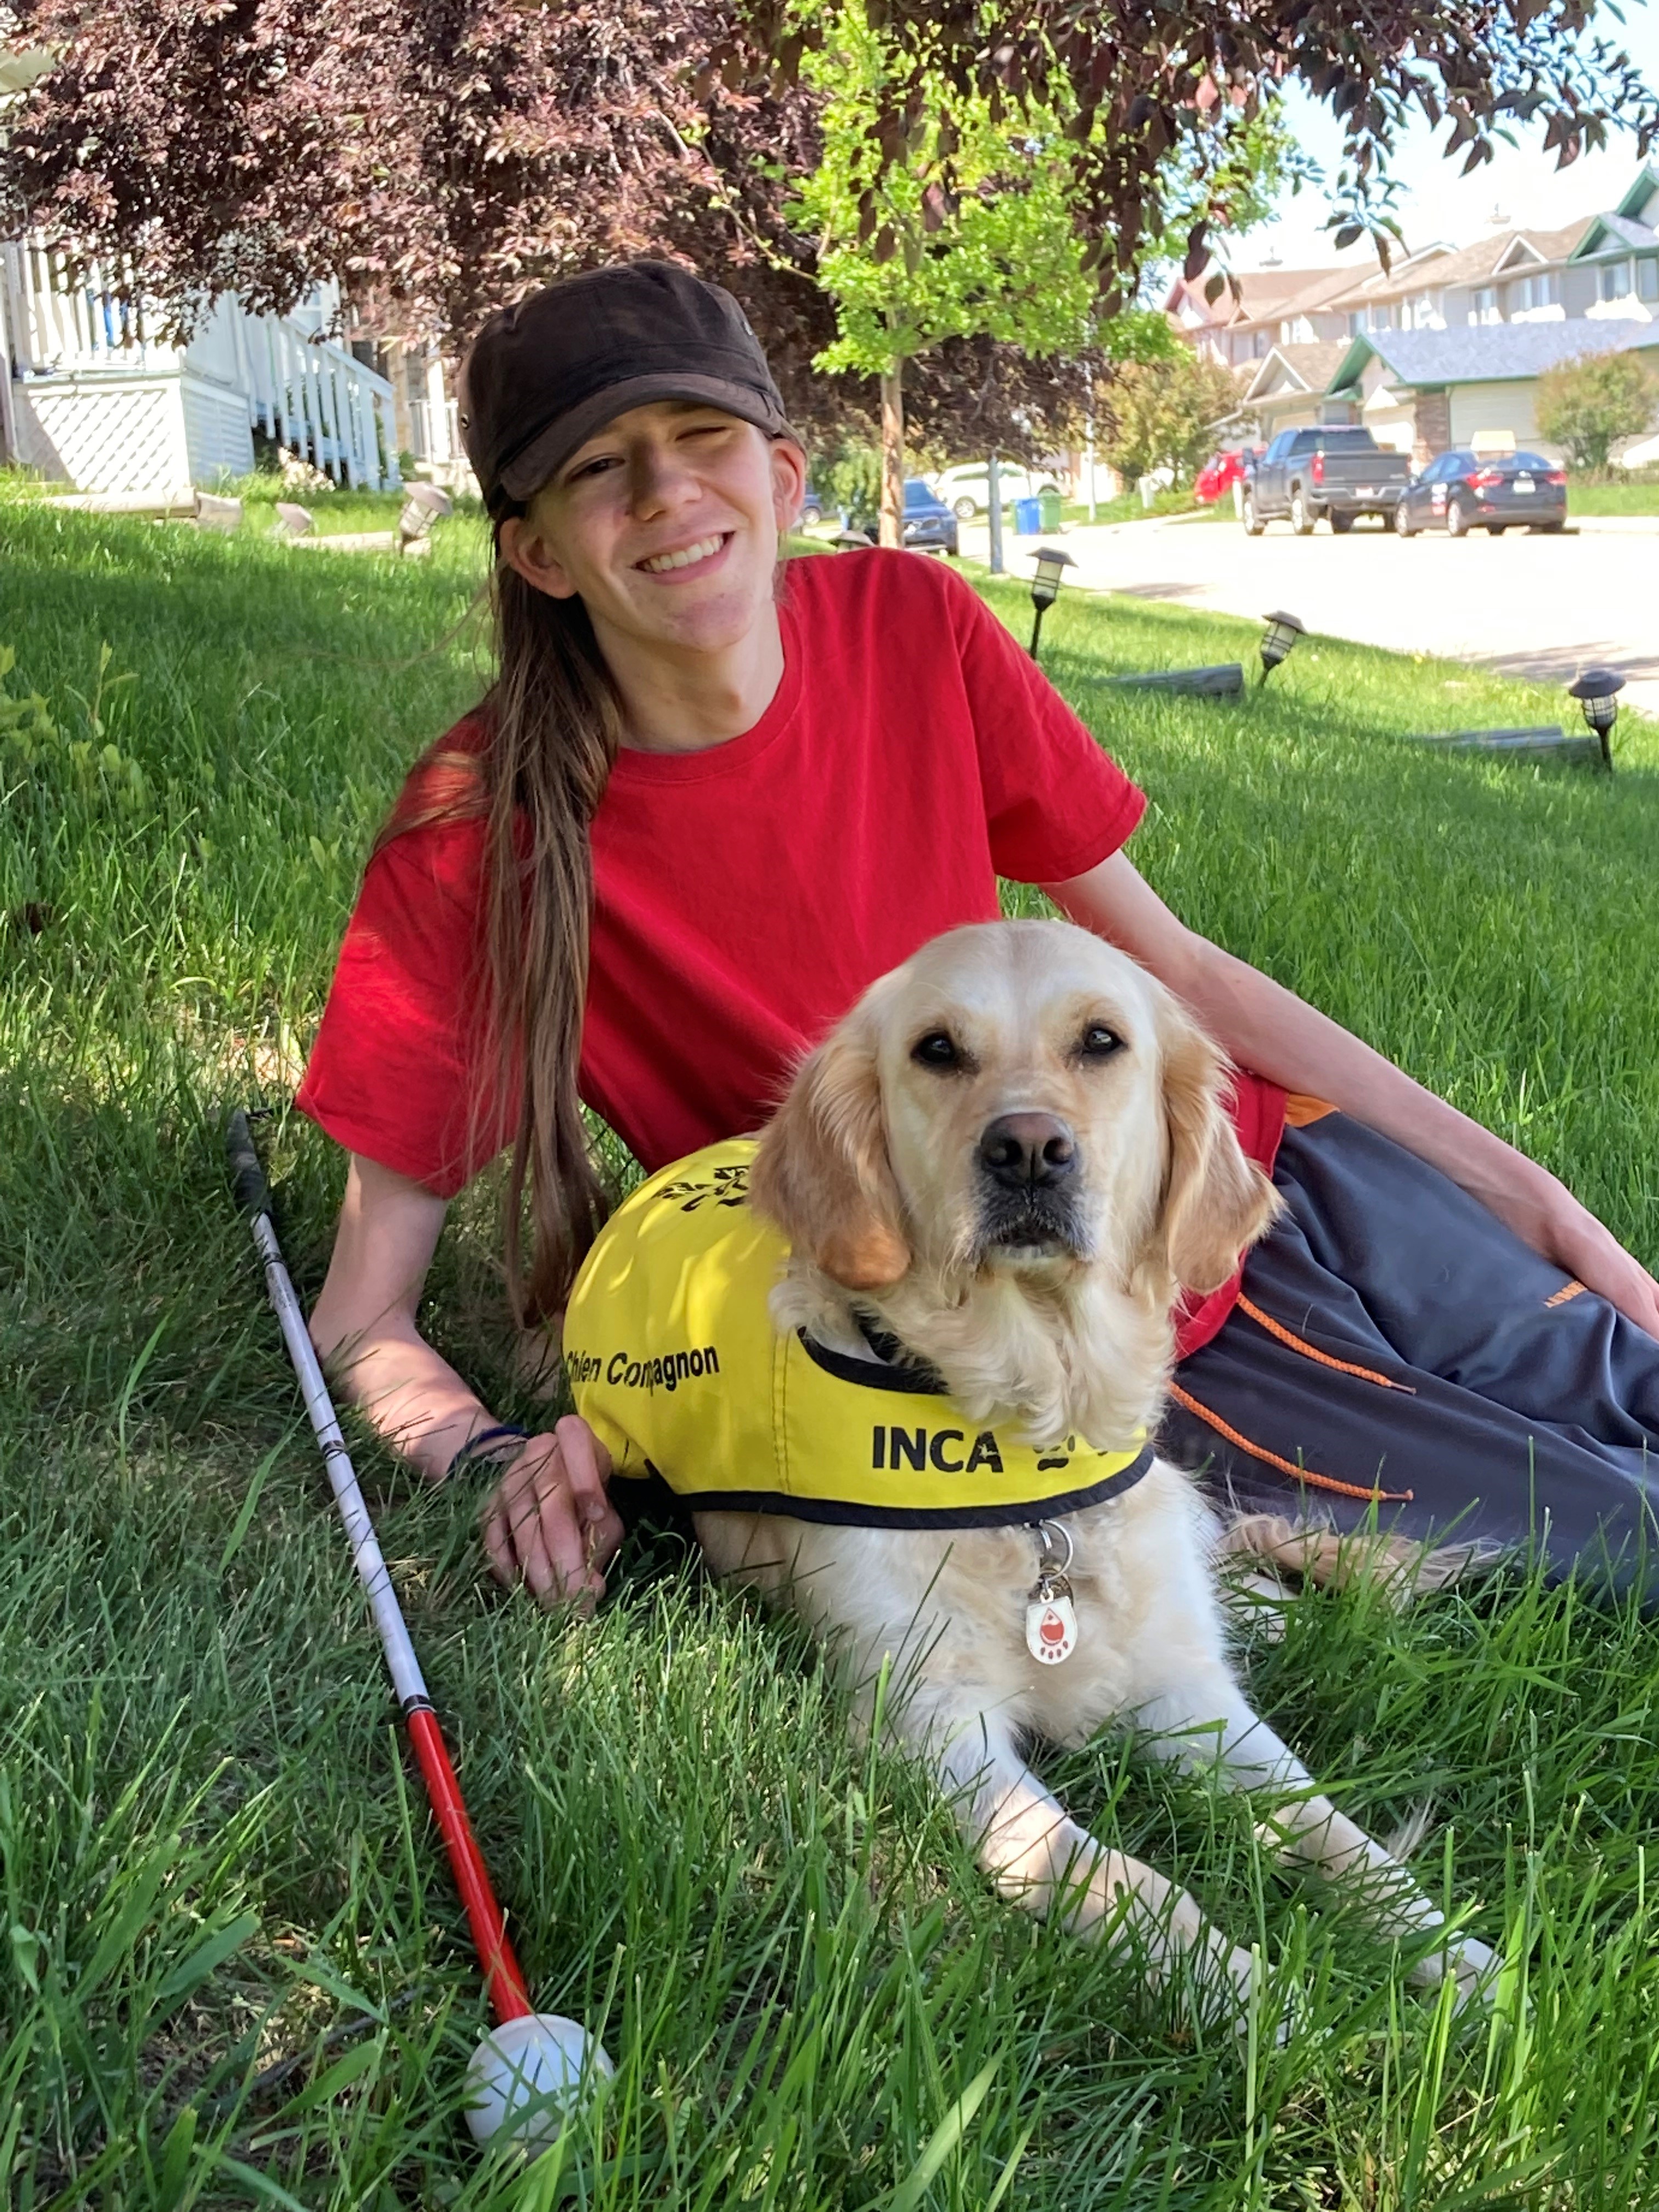 Zach reclining on the grass with his buddy dog Elsie, a golden retriever who is wearing a yellow CNIB buddy dog vest. Zach’s white cane sits on the grass next to him.